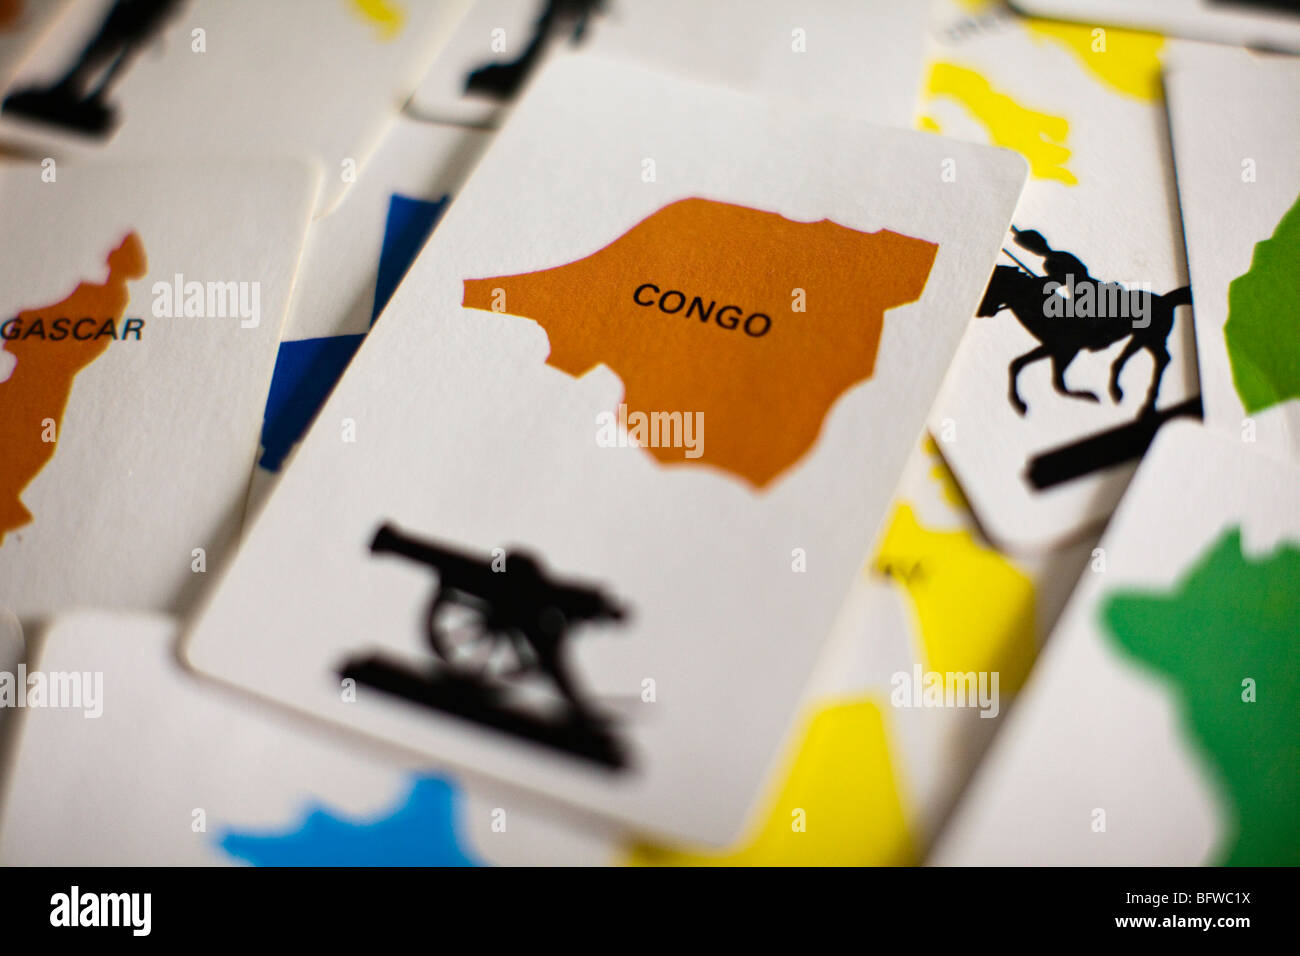 The Congo card in the classic board game of 'Risk' Stock Photo